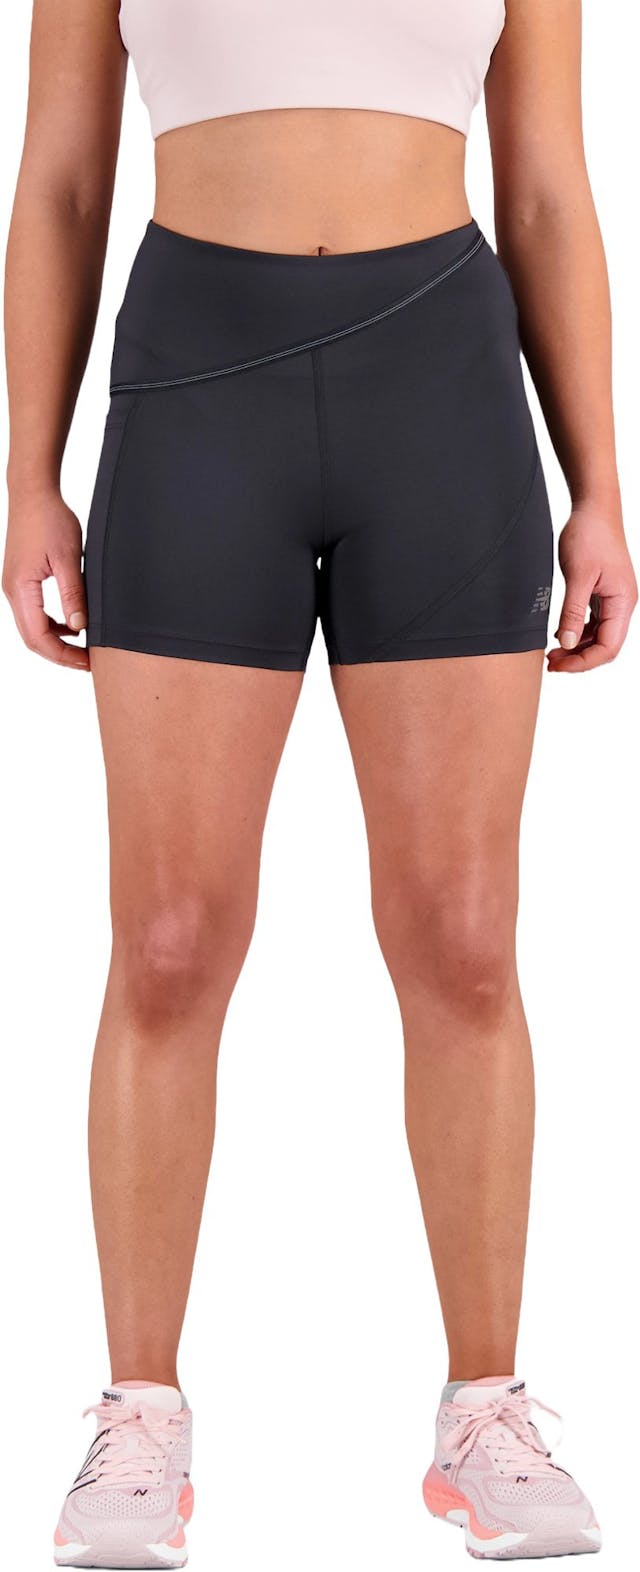 Product image for Q Speed Shape Shield 4 Inch Fitted Short - Women's